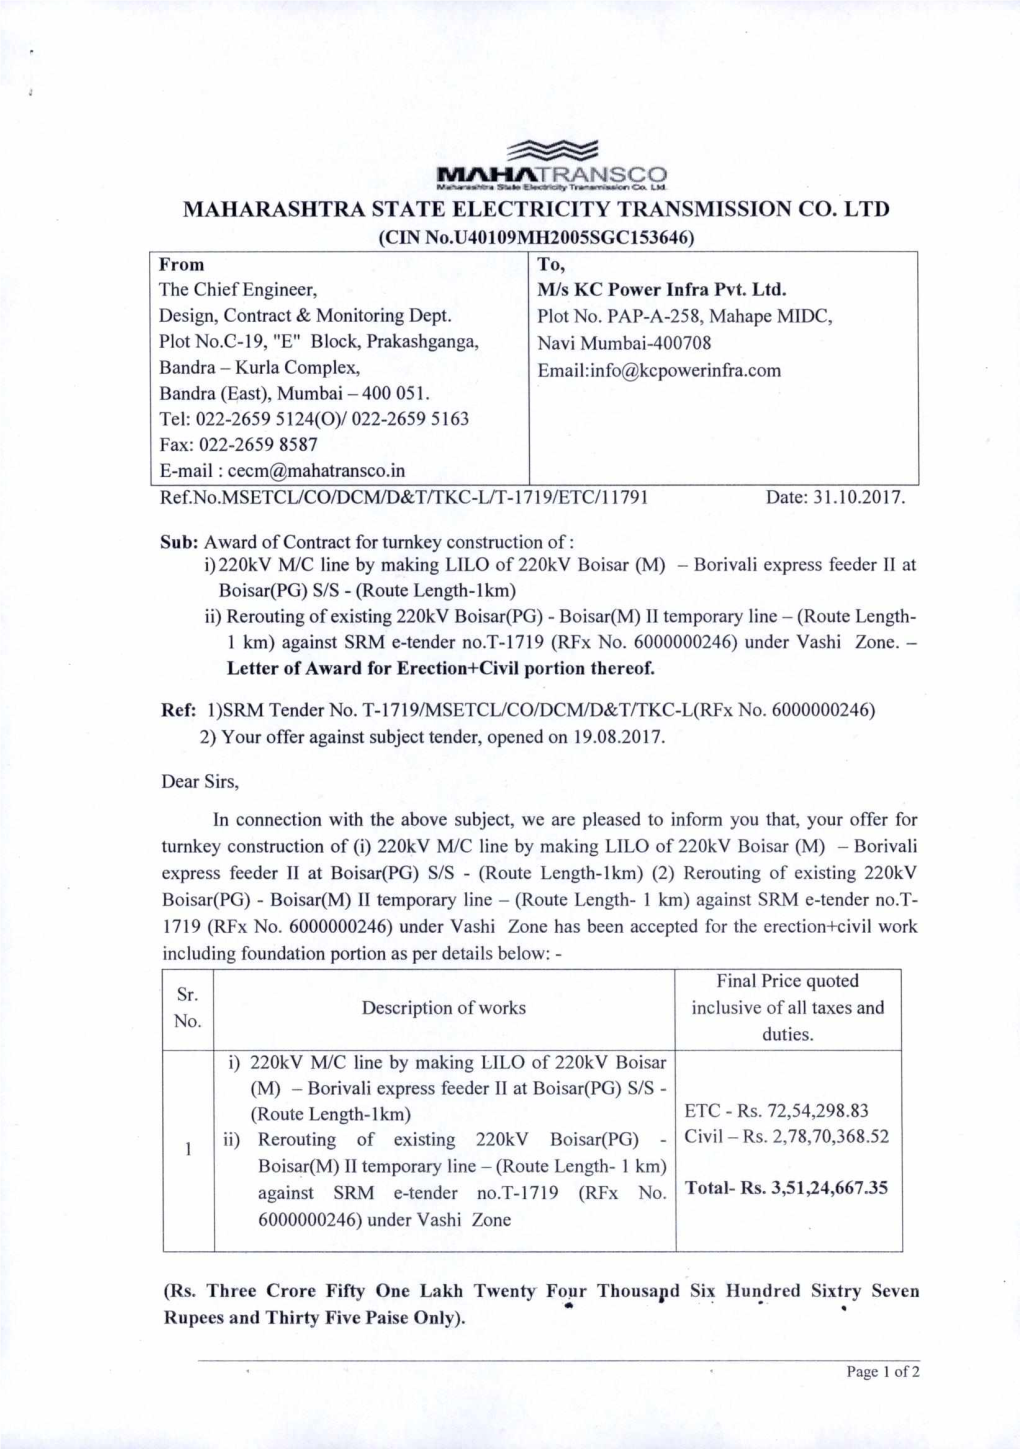 MAHARASHTRA STATE ELECTRICITY TRANSMISSION CO. LTD (CIN No.U40109MH2005SGC153646) from To, the Chief Engineer, M/S KC Power Infra Pvt